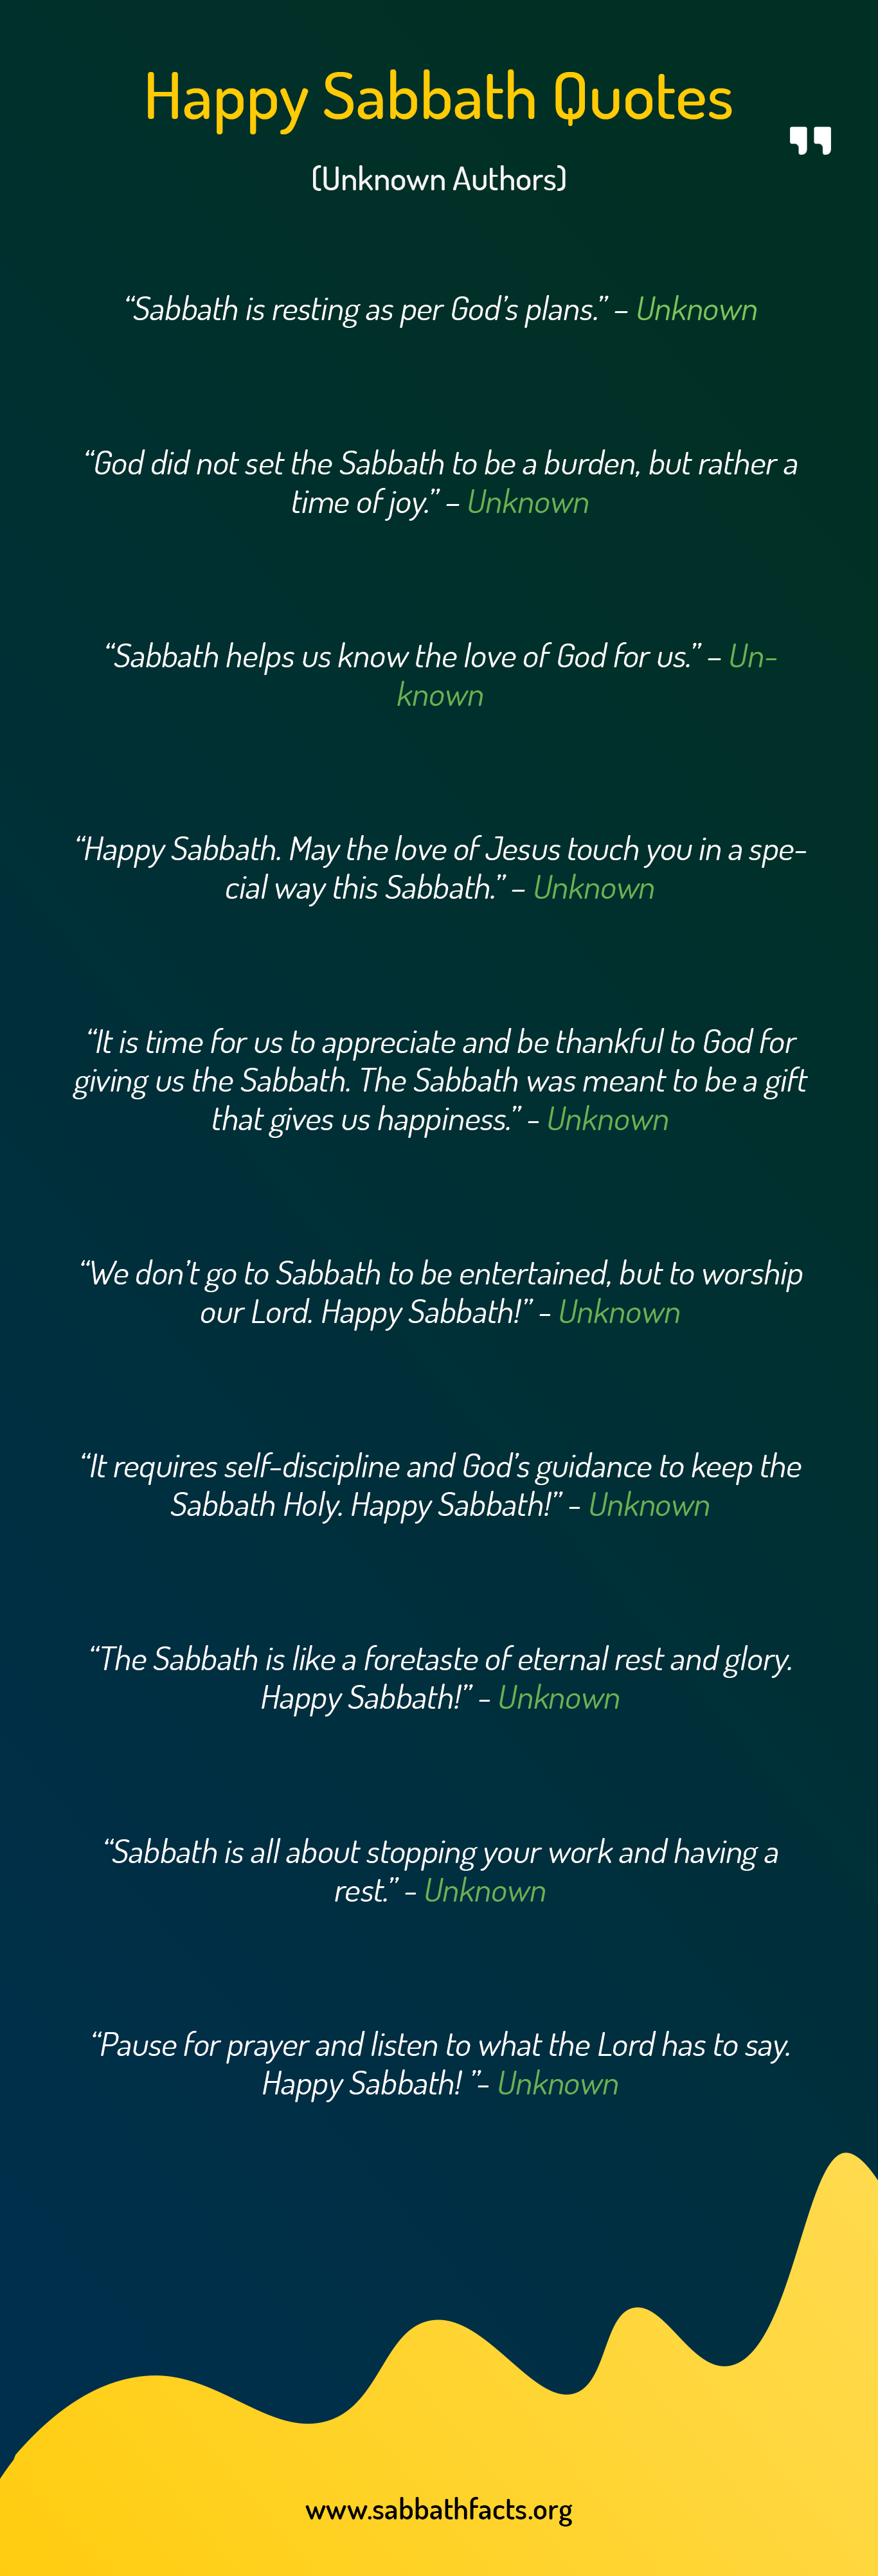 Inspirational Happy Sabbath Quotes (Unknown authors)